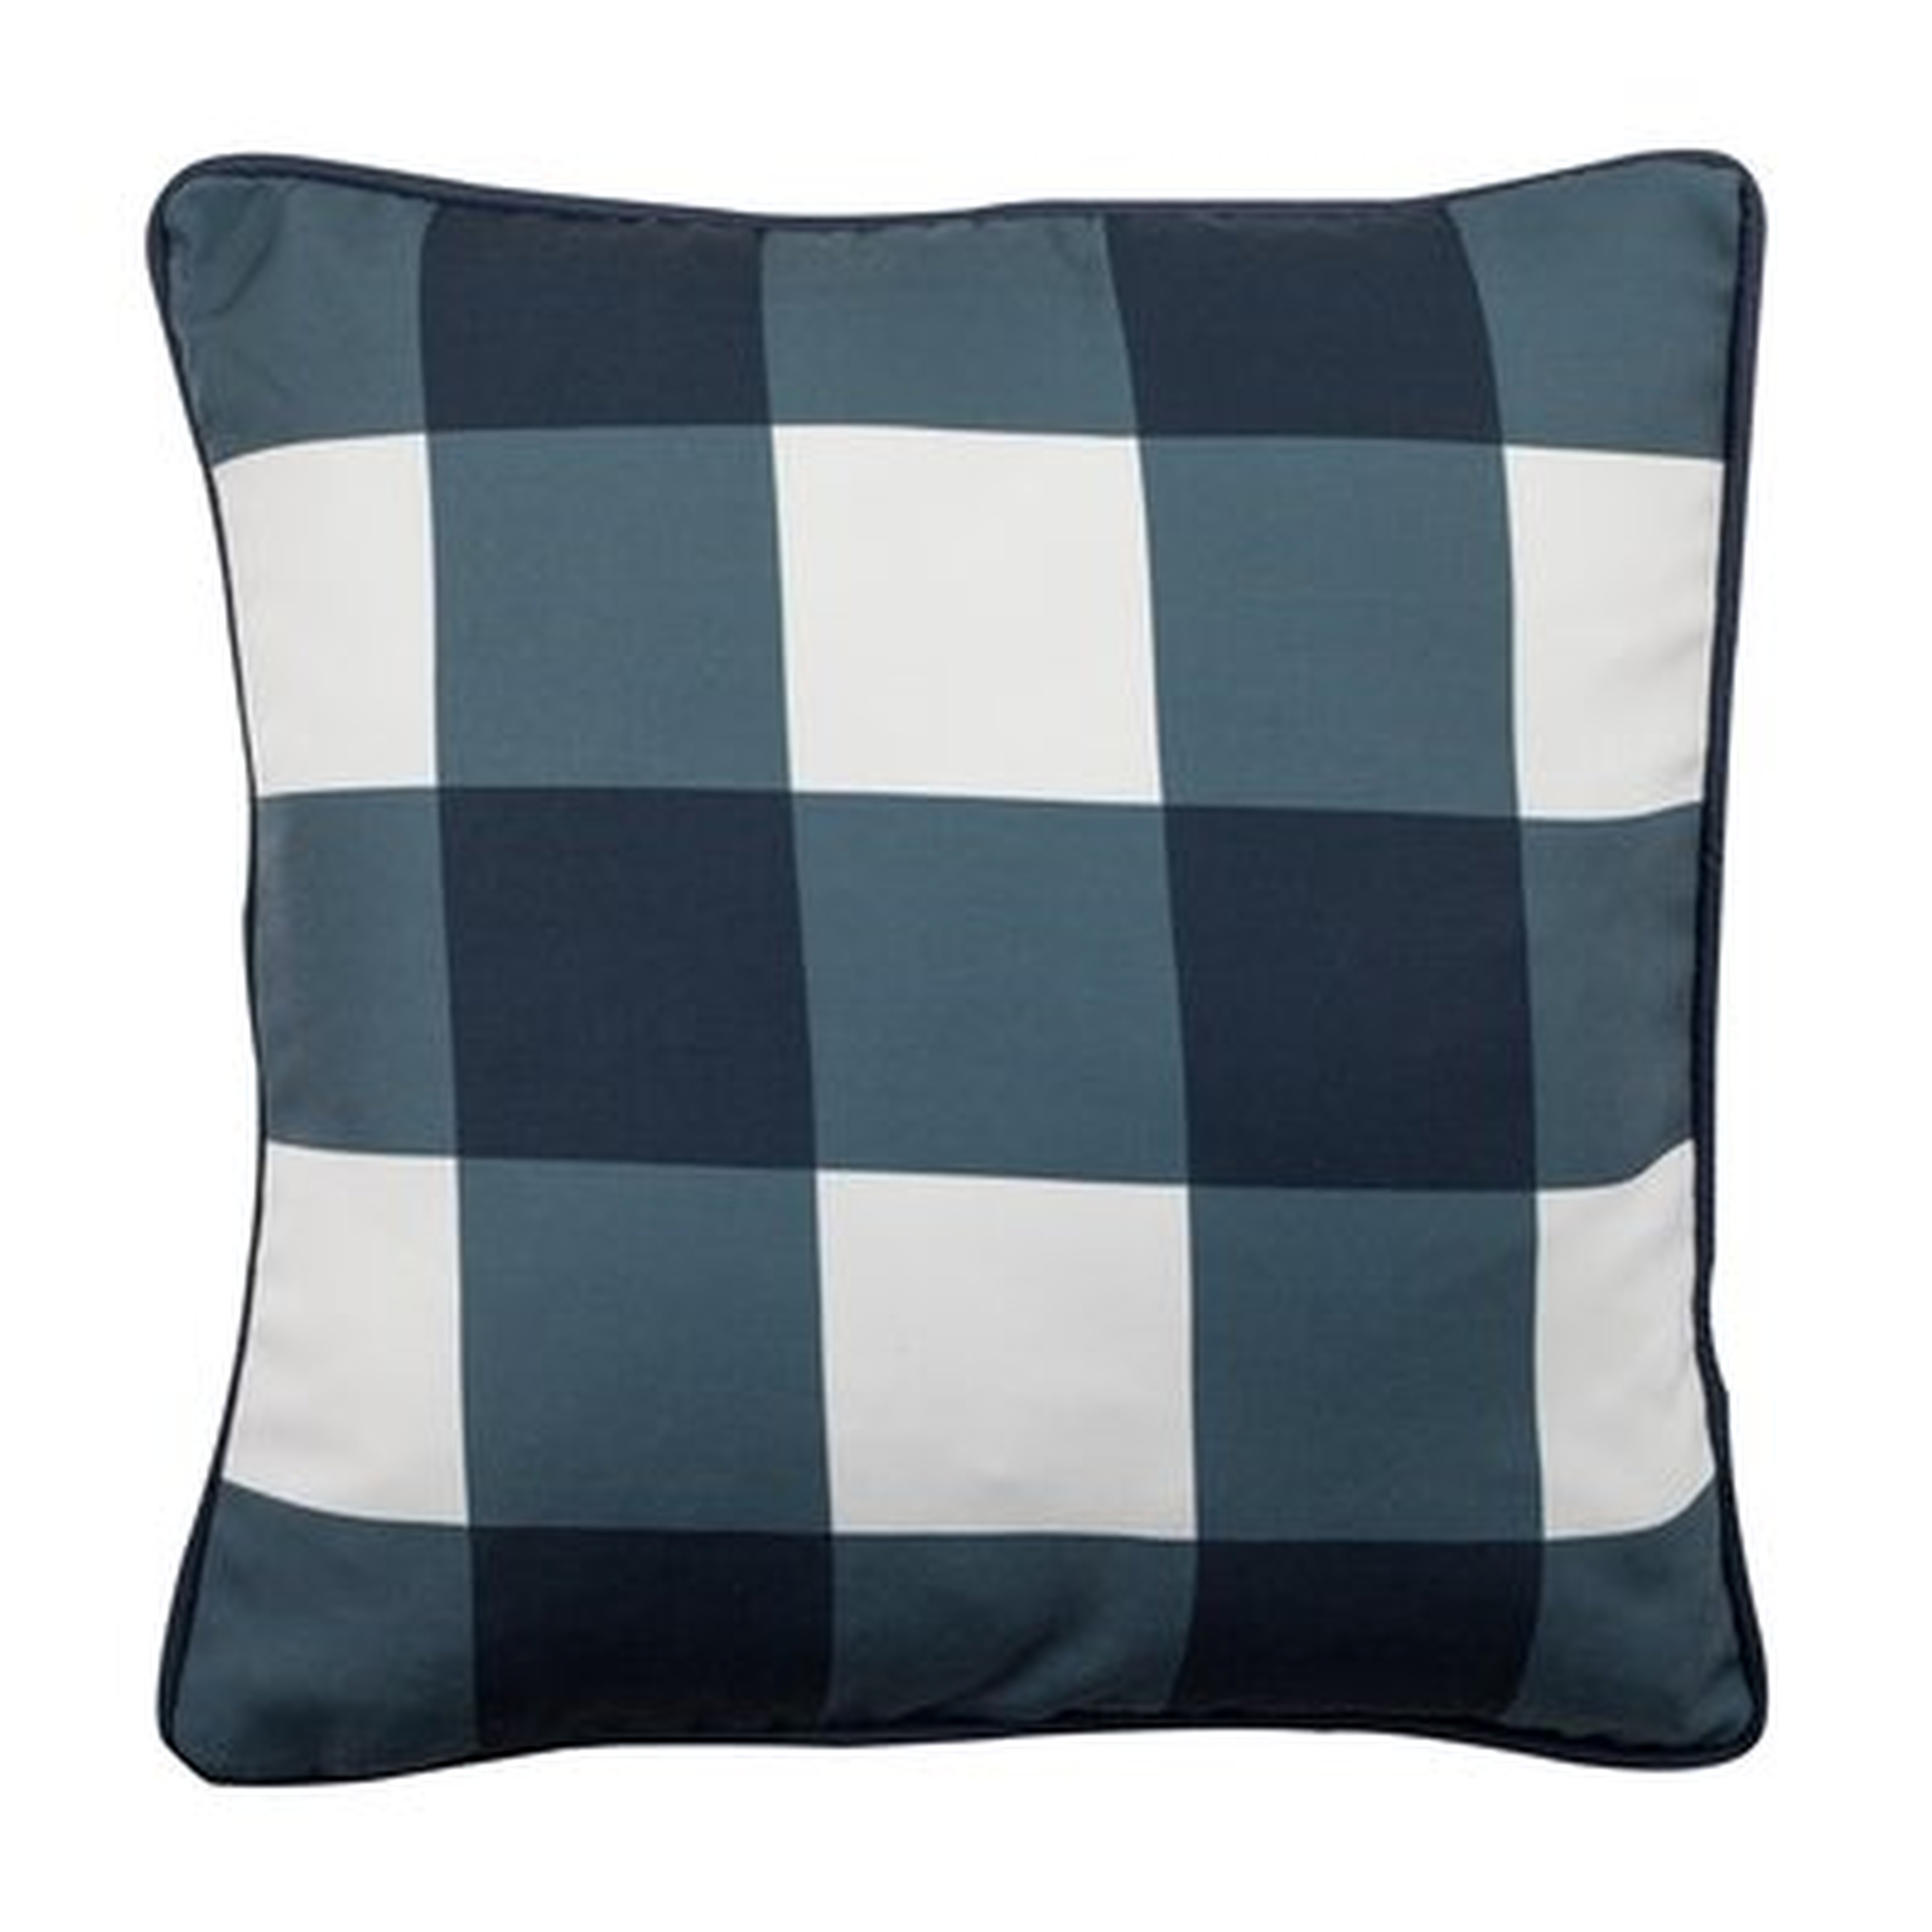 Buffalo Plaid Outdoor Pillow, Blue, 17" Sq. With Piping - Wayfair